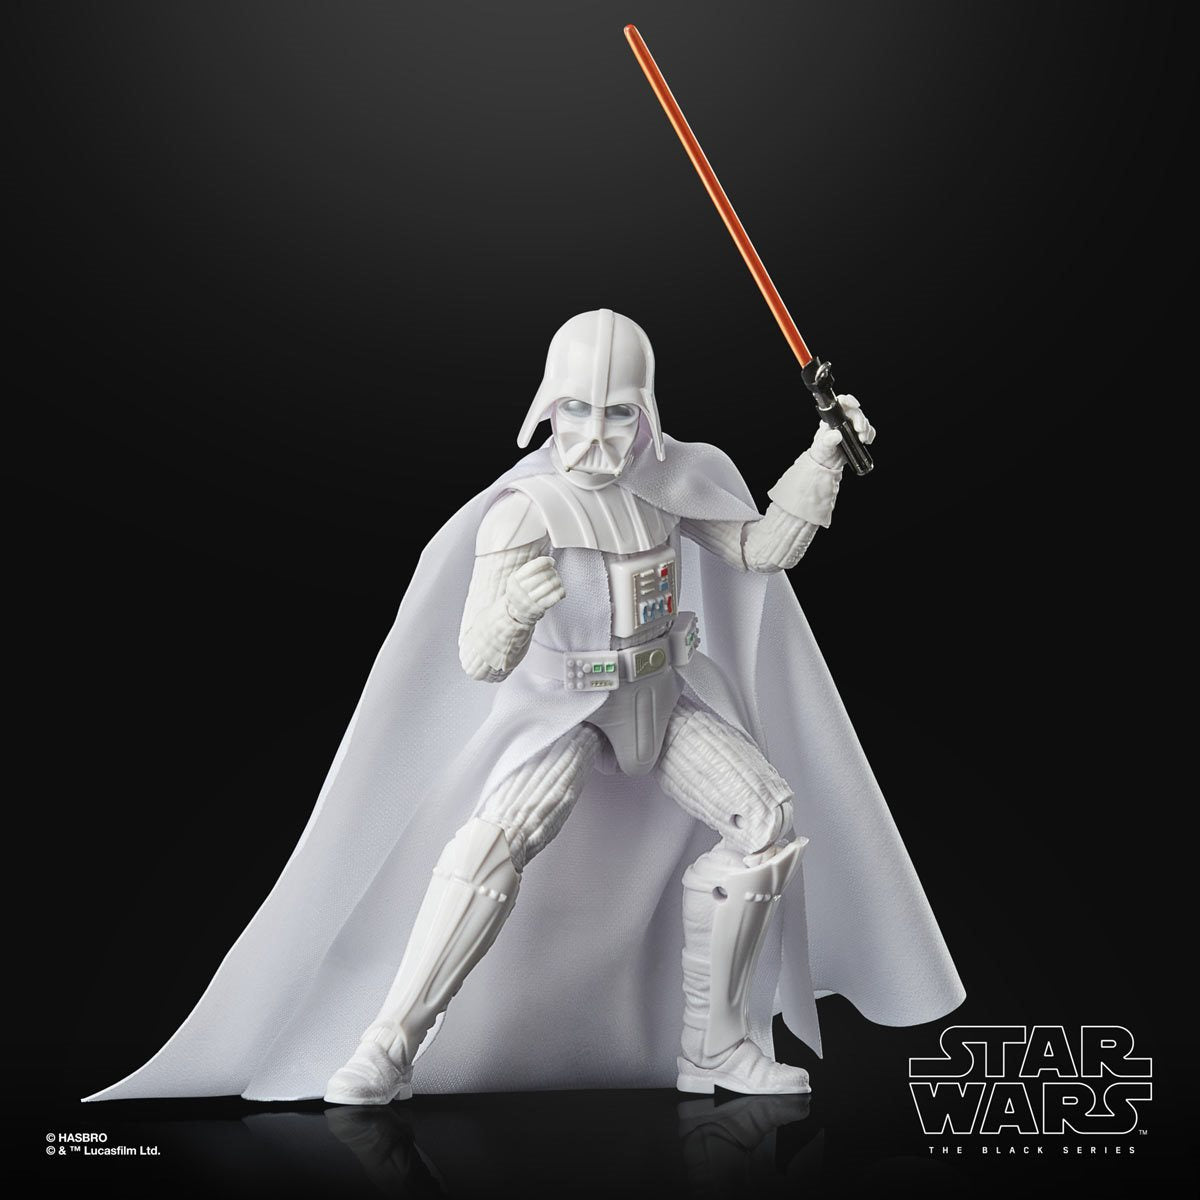 STAR WARS The Black Series Darth Vader Toy 6-Inch-Scale The Empire Strikes  Back Collectible Action Figure, Kids Ages 4 and Up